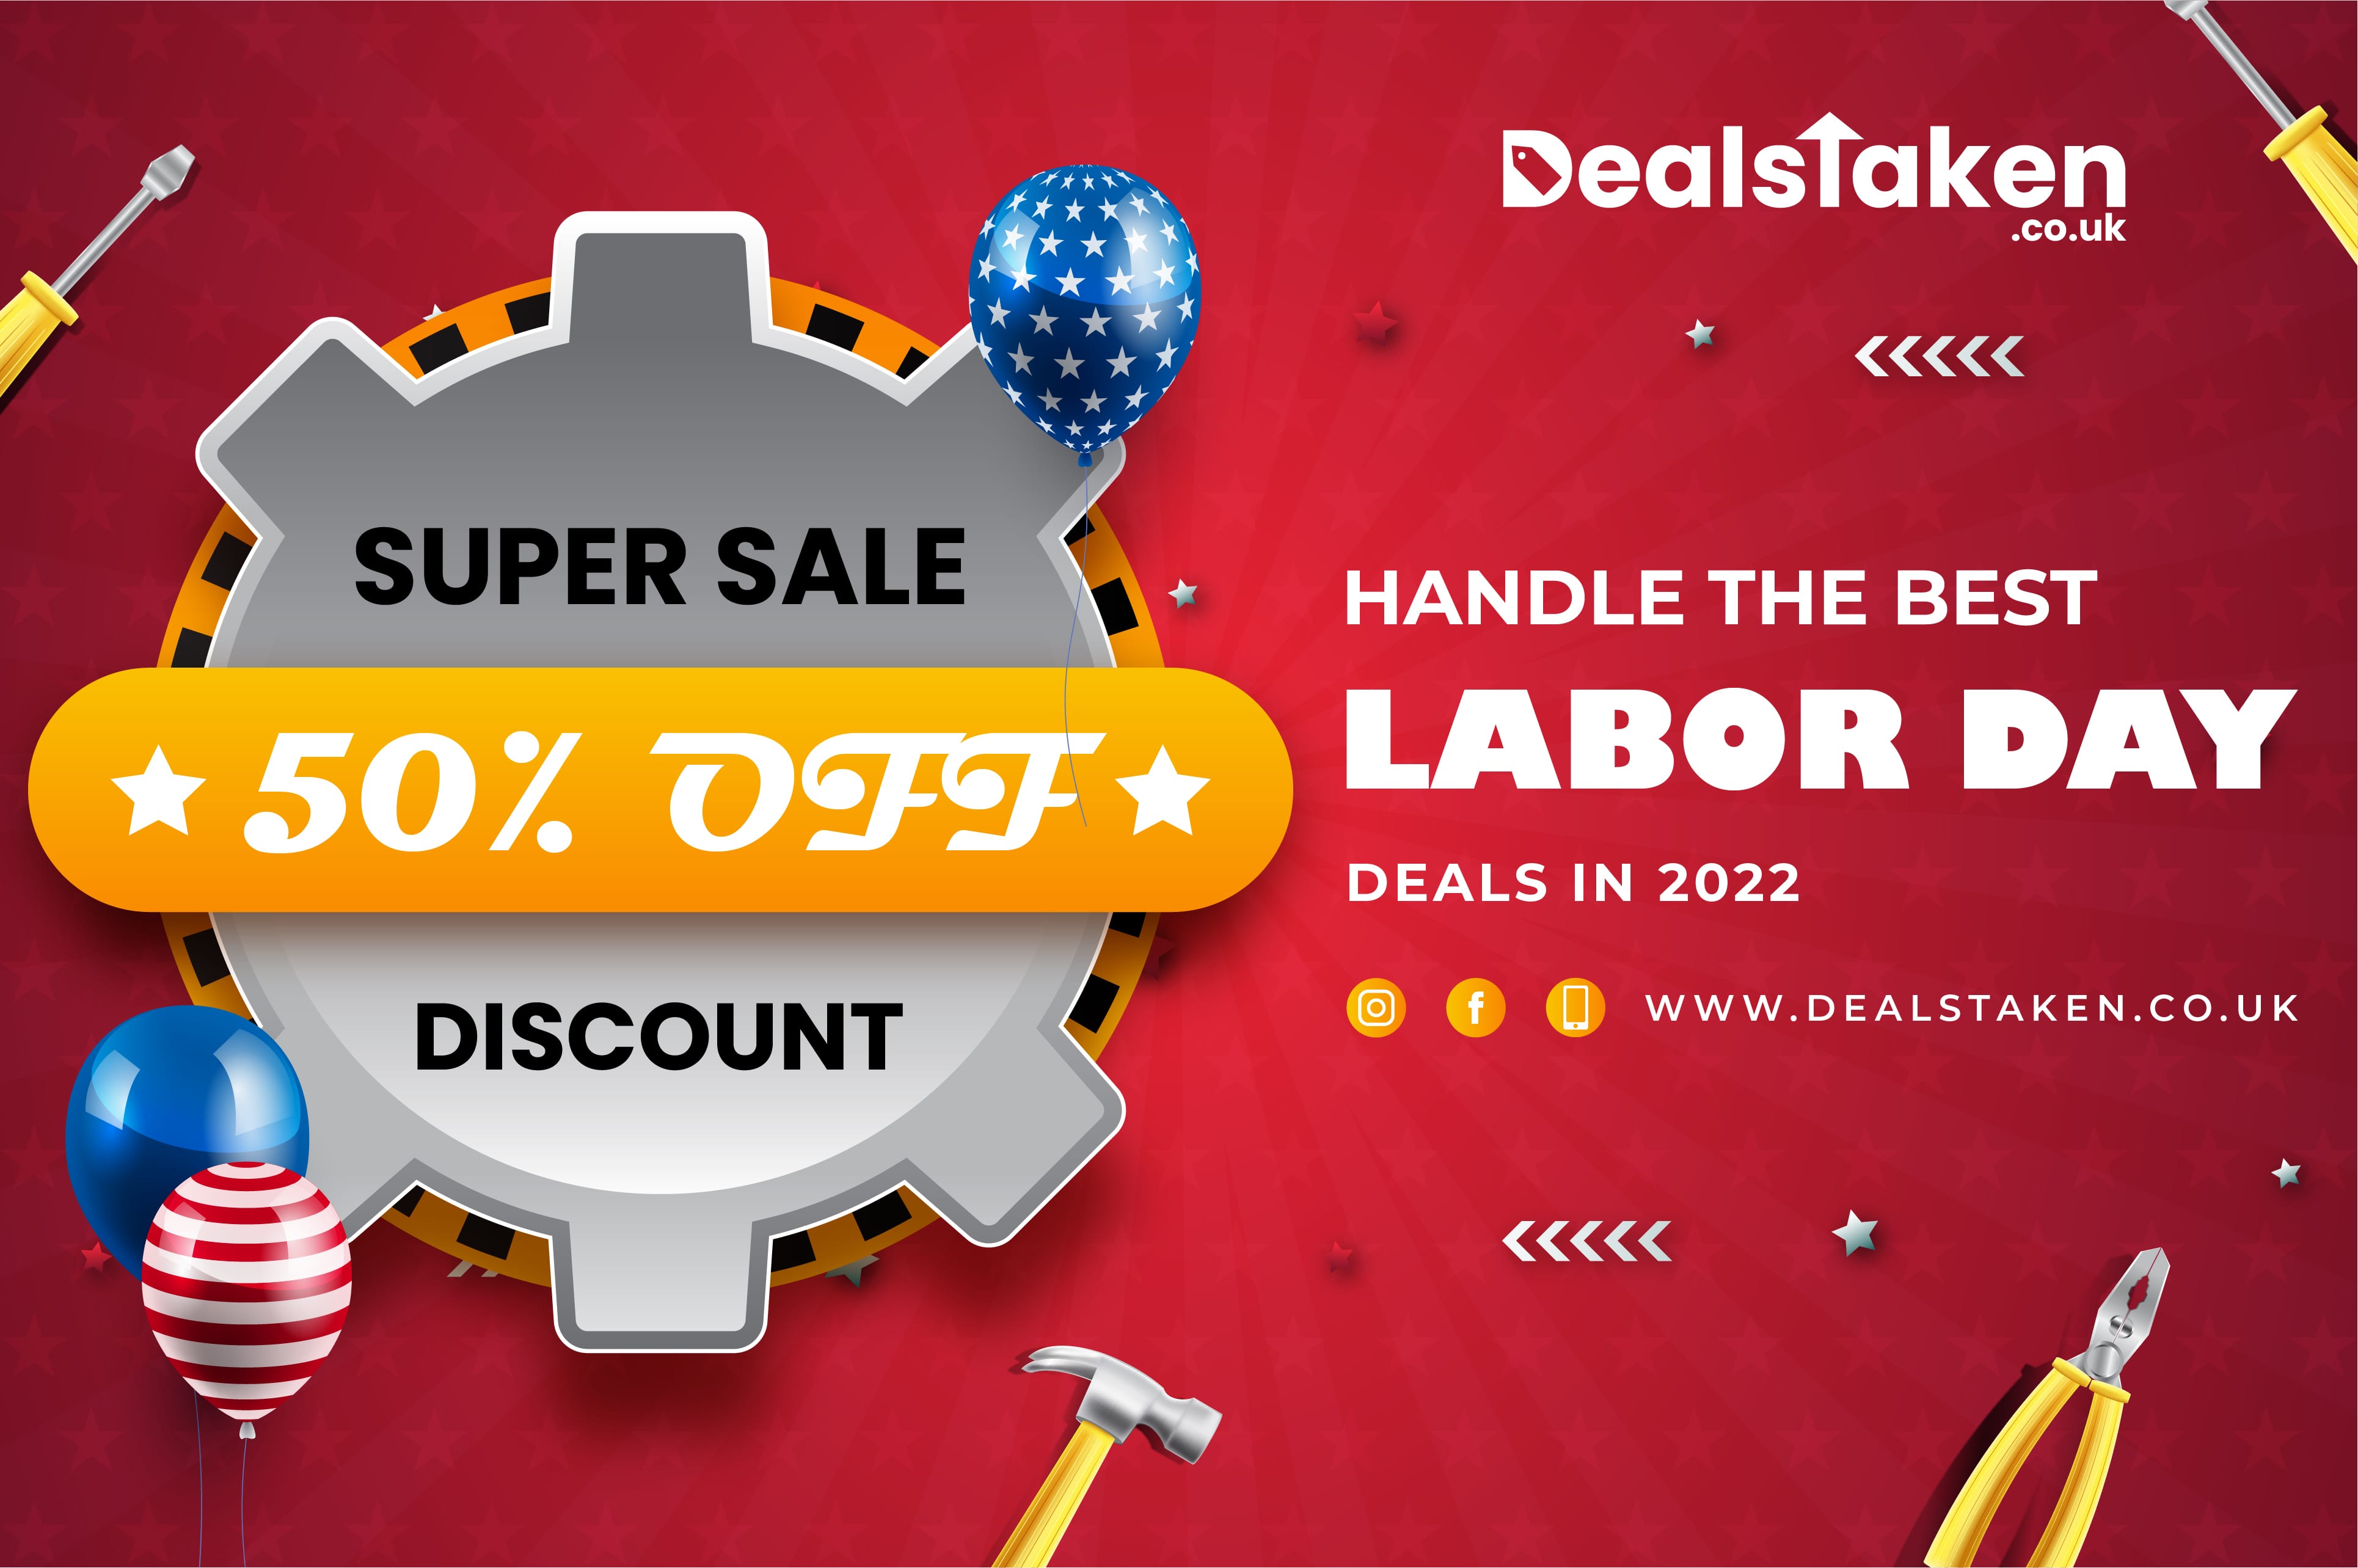 handle-the-best-labor-day-deals-in-2022